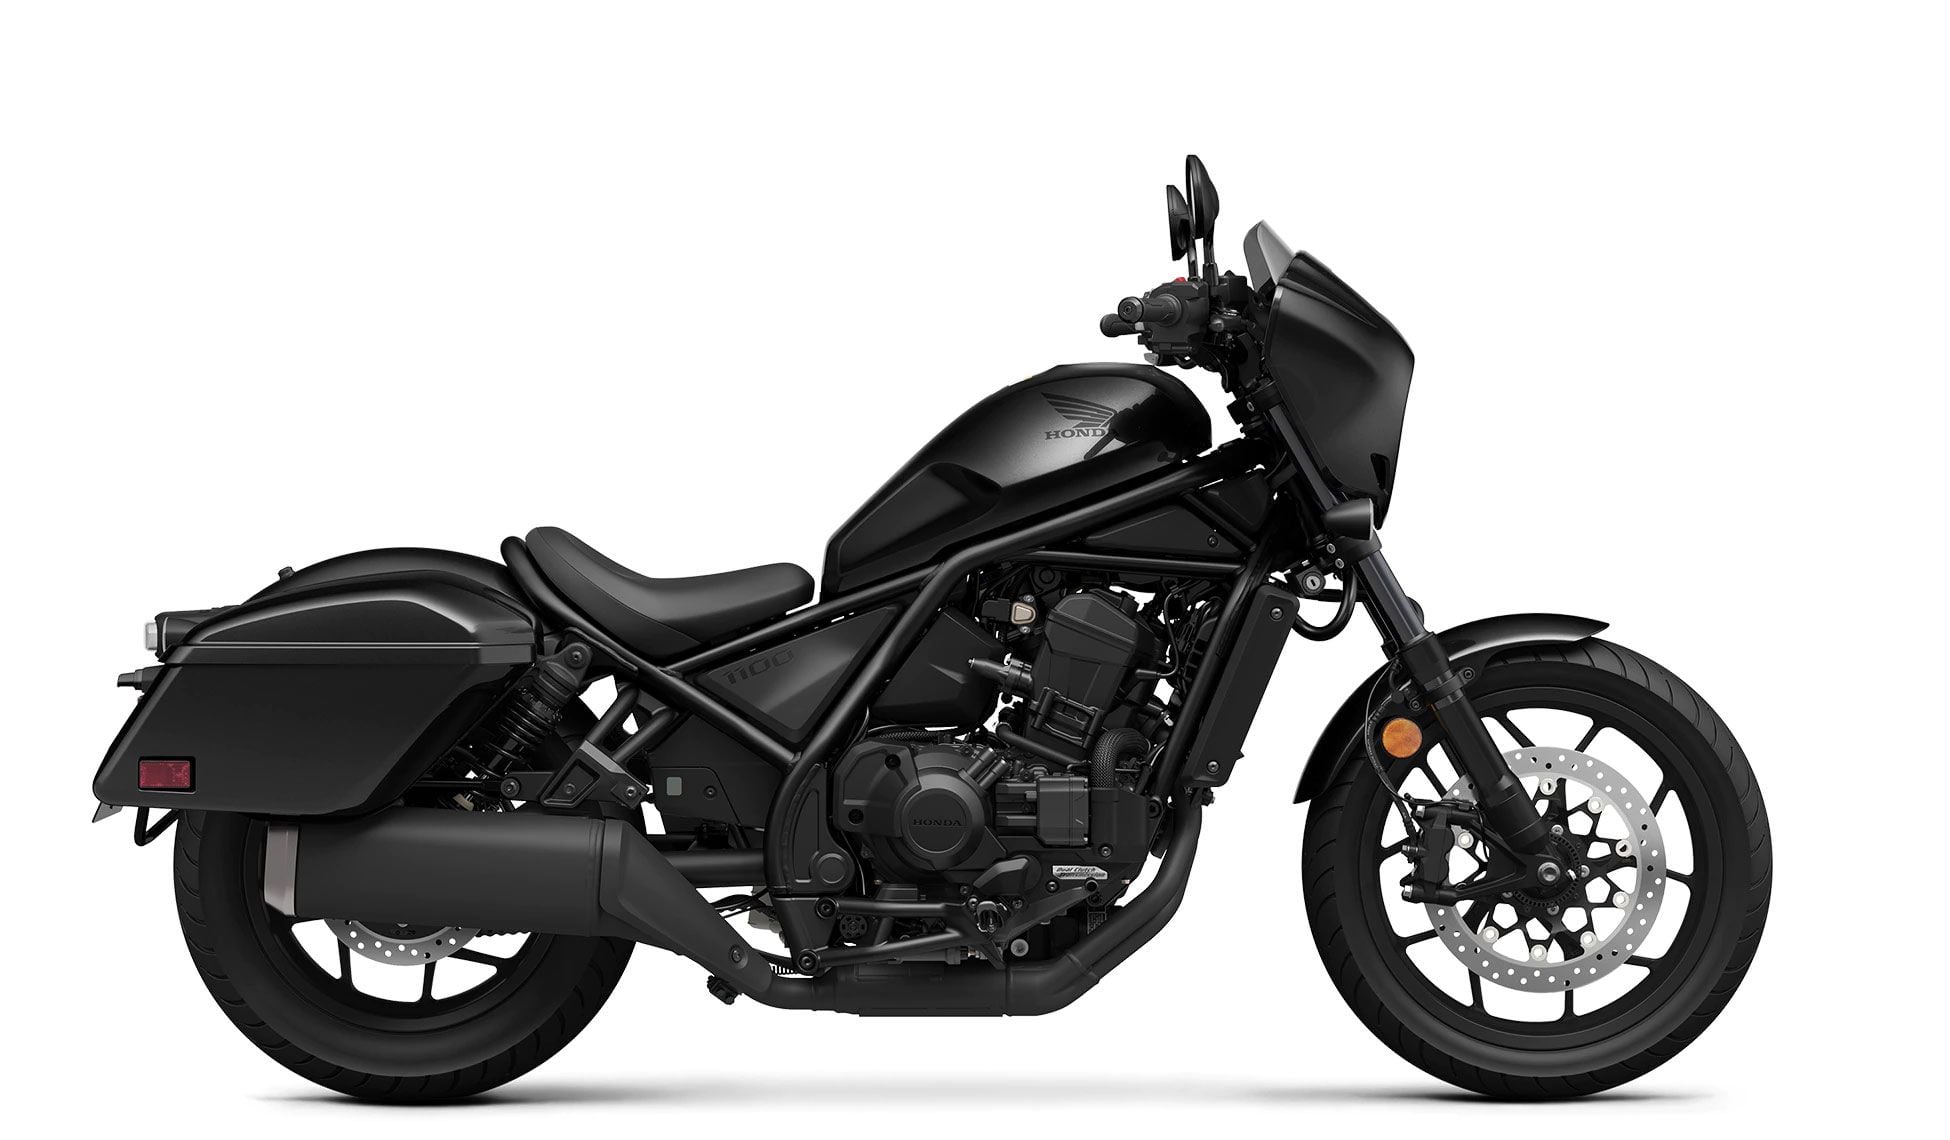 The 2023 Honda Rebel 1100T DCT bagger in all its official Honda website glory.